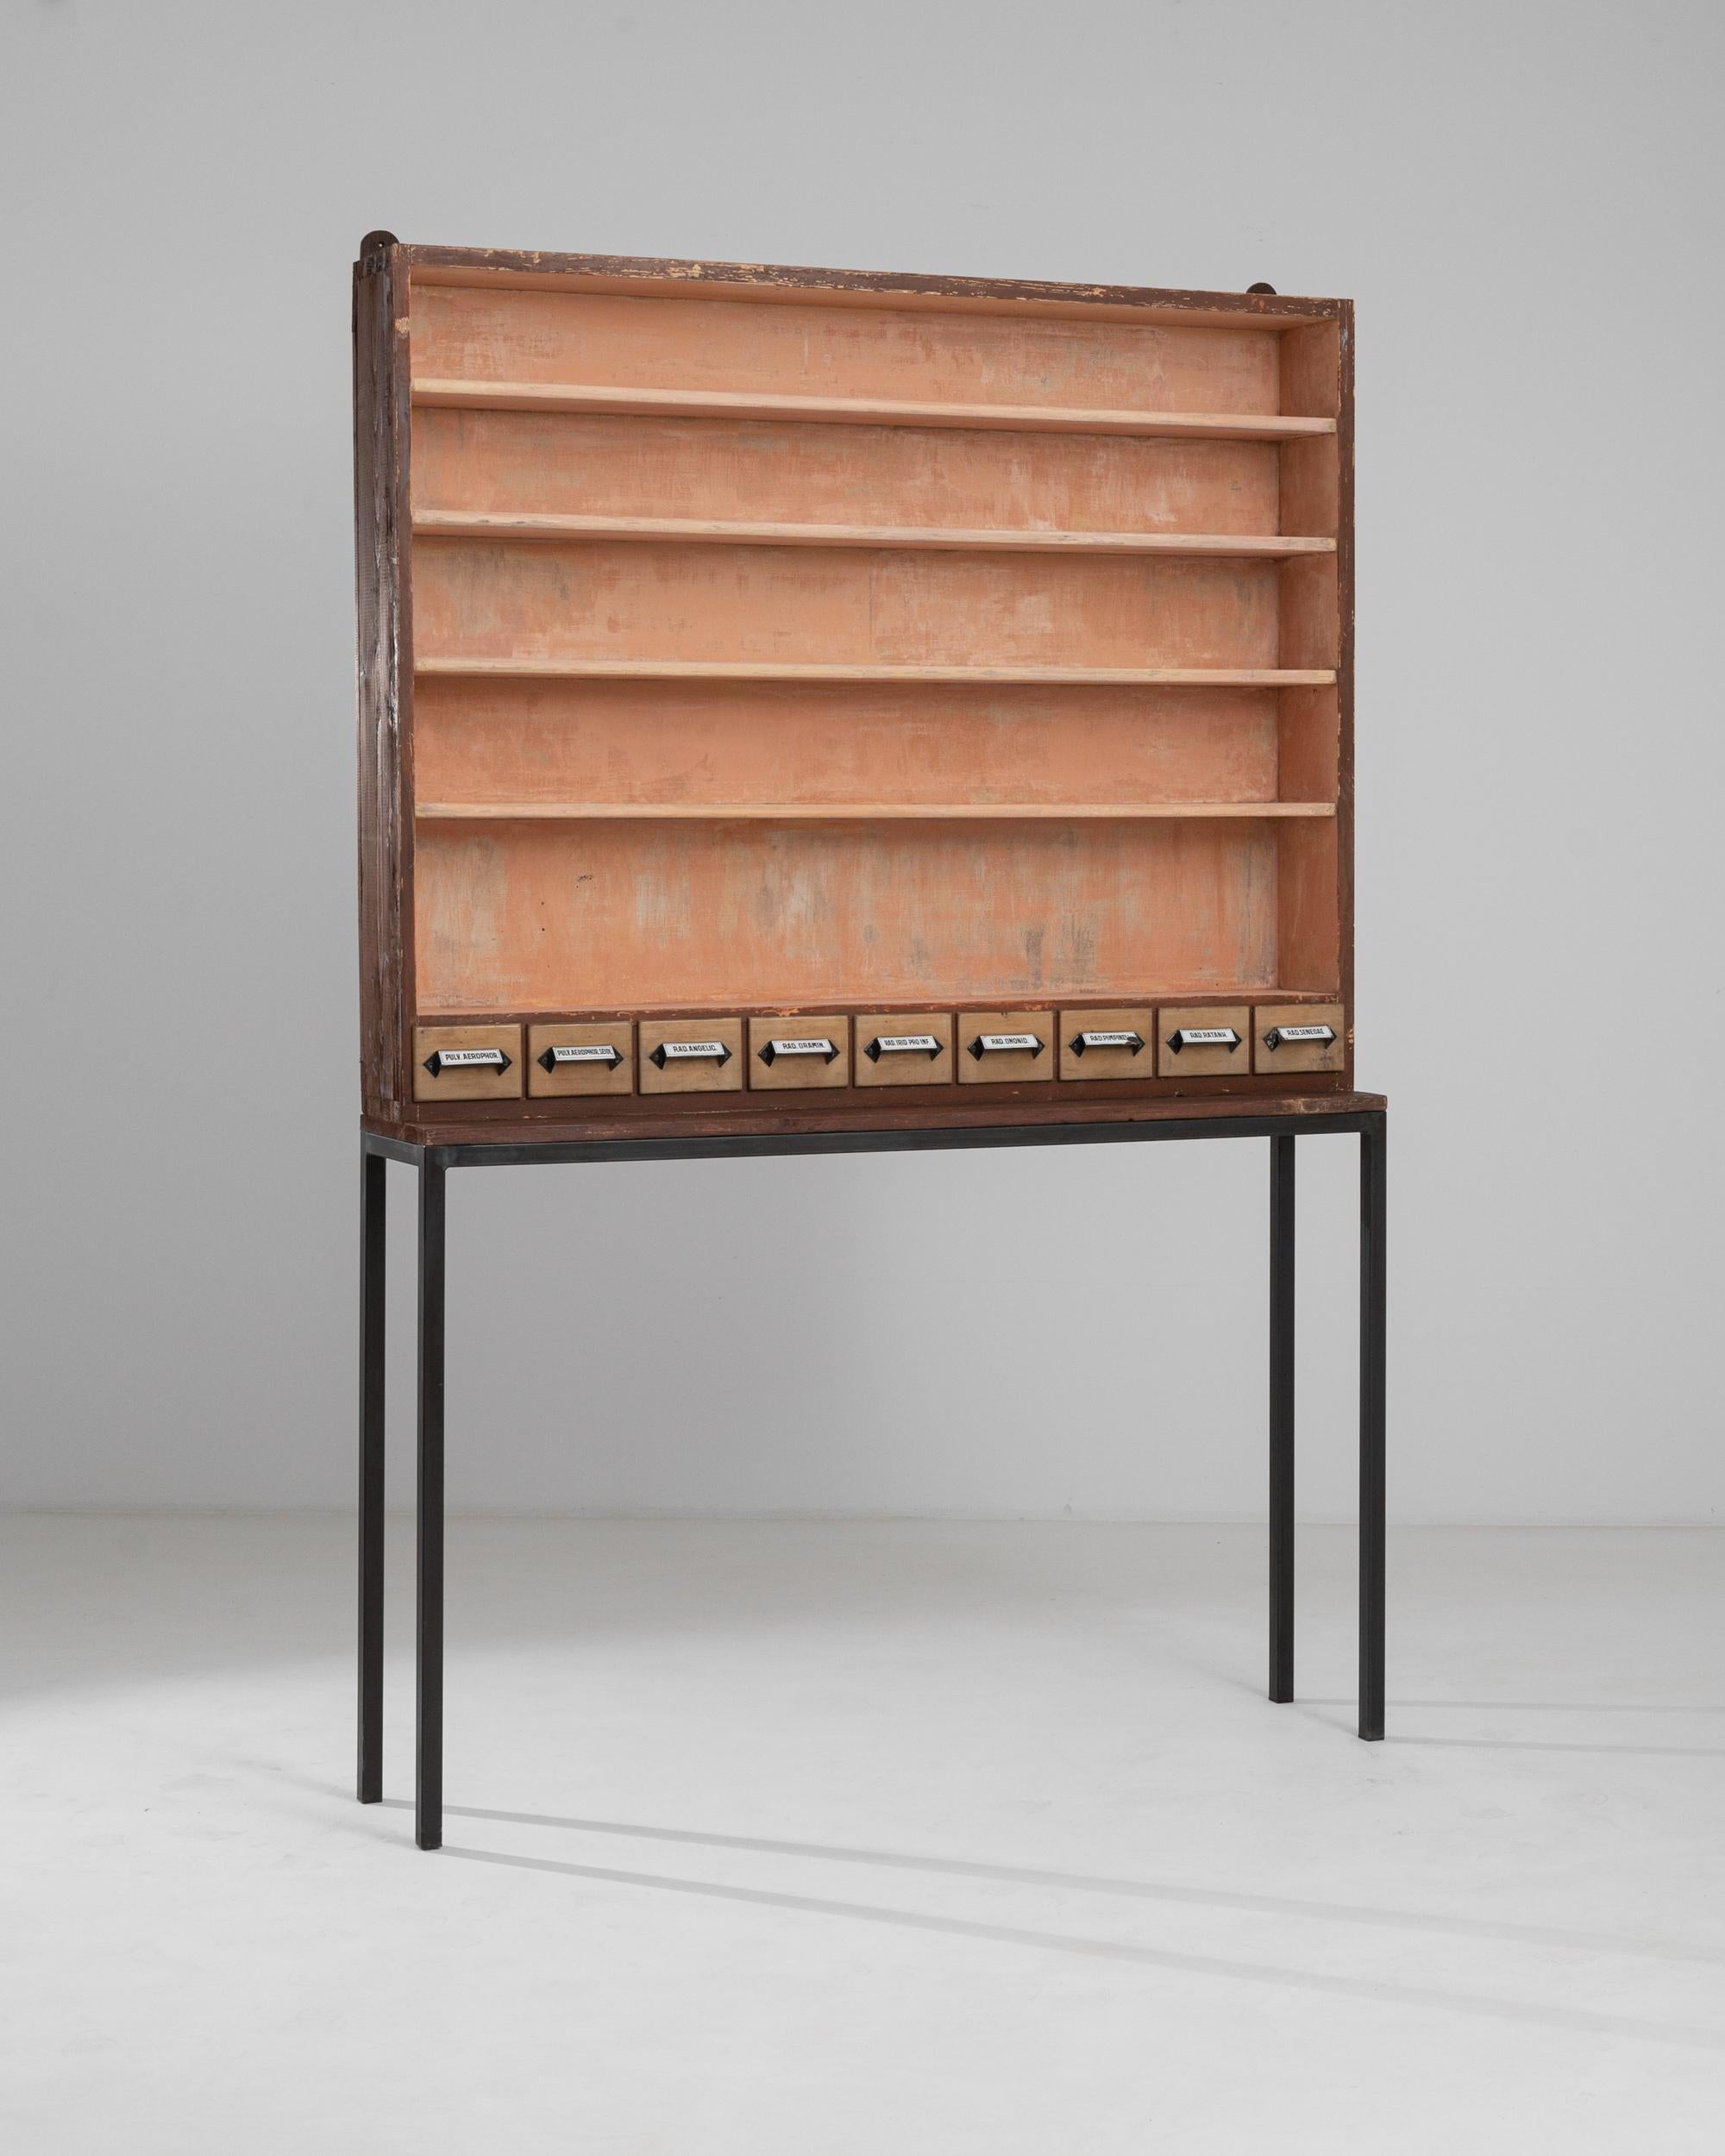 A metal and wooden cabinet from 1900s France. This high-standing cabinet boasts a warm color palette, featuring black metal legs, a rich umber outer wood tone, and a bright burnt peach interior. Originally designed for housing apothecary bottles and